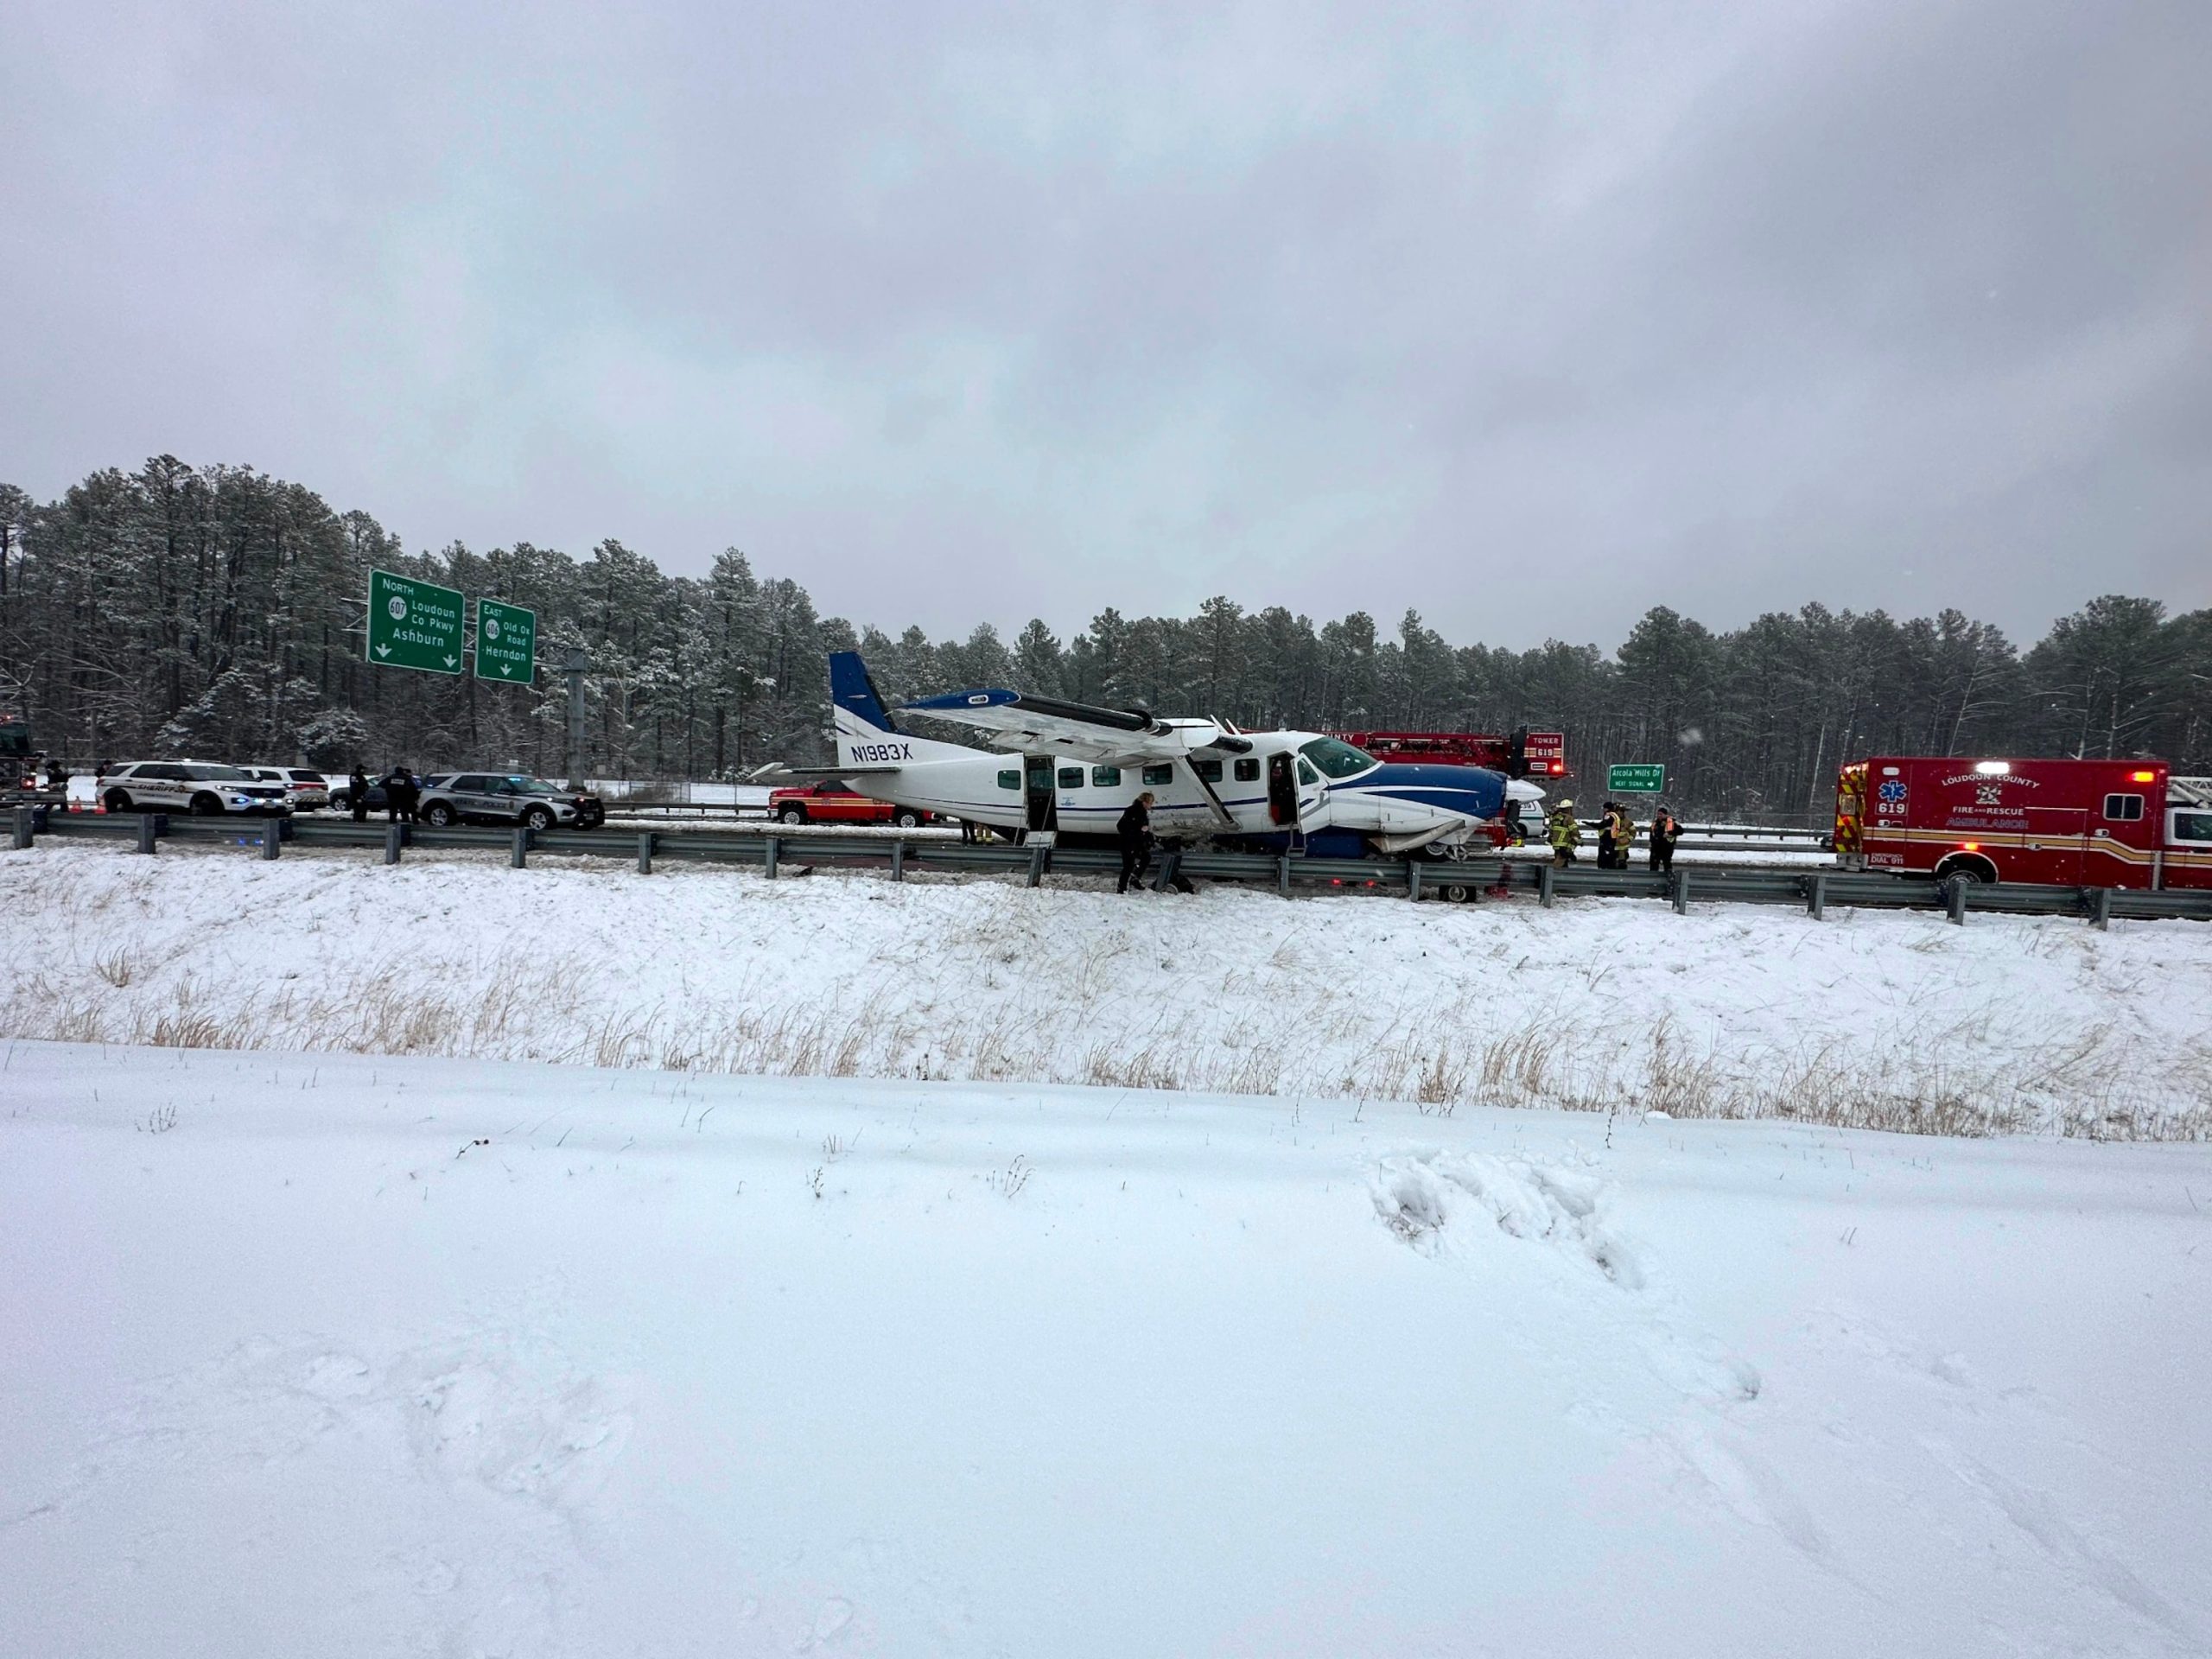 Small aircraft carrying 7 individuals experiences a challenging landing on Virginia highway